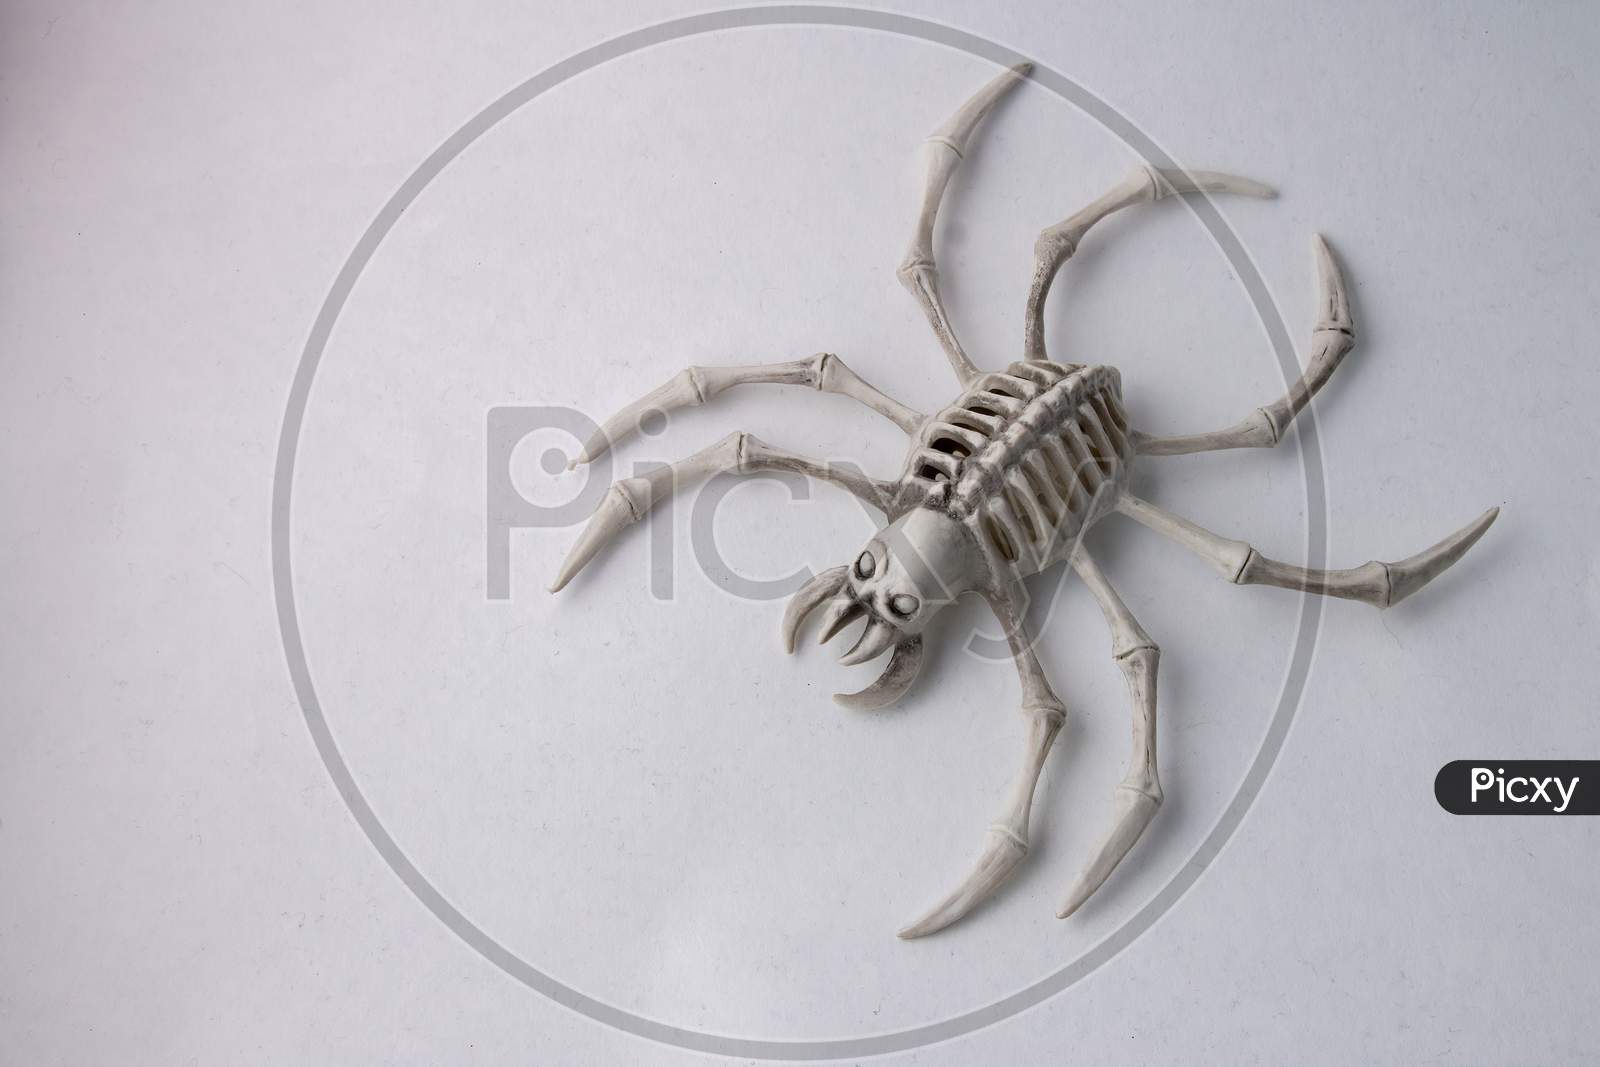 Scary Spider Skeleton Halloween Decoration Isolated On White